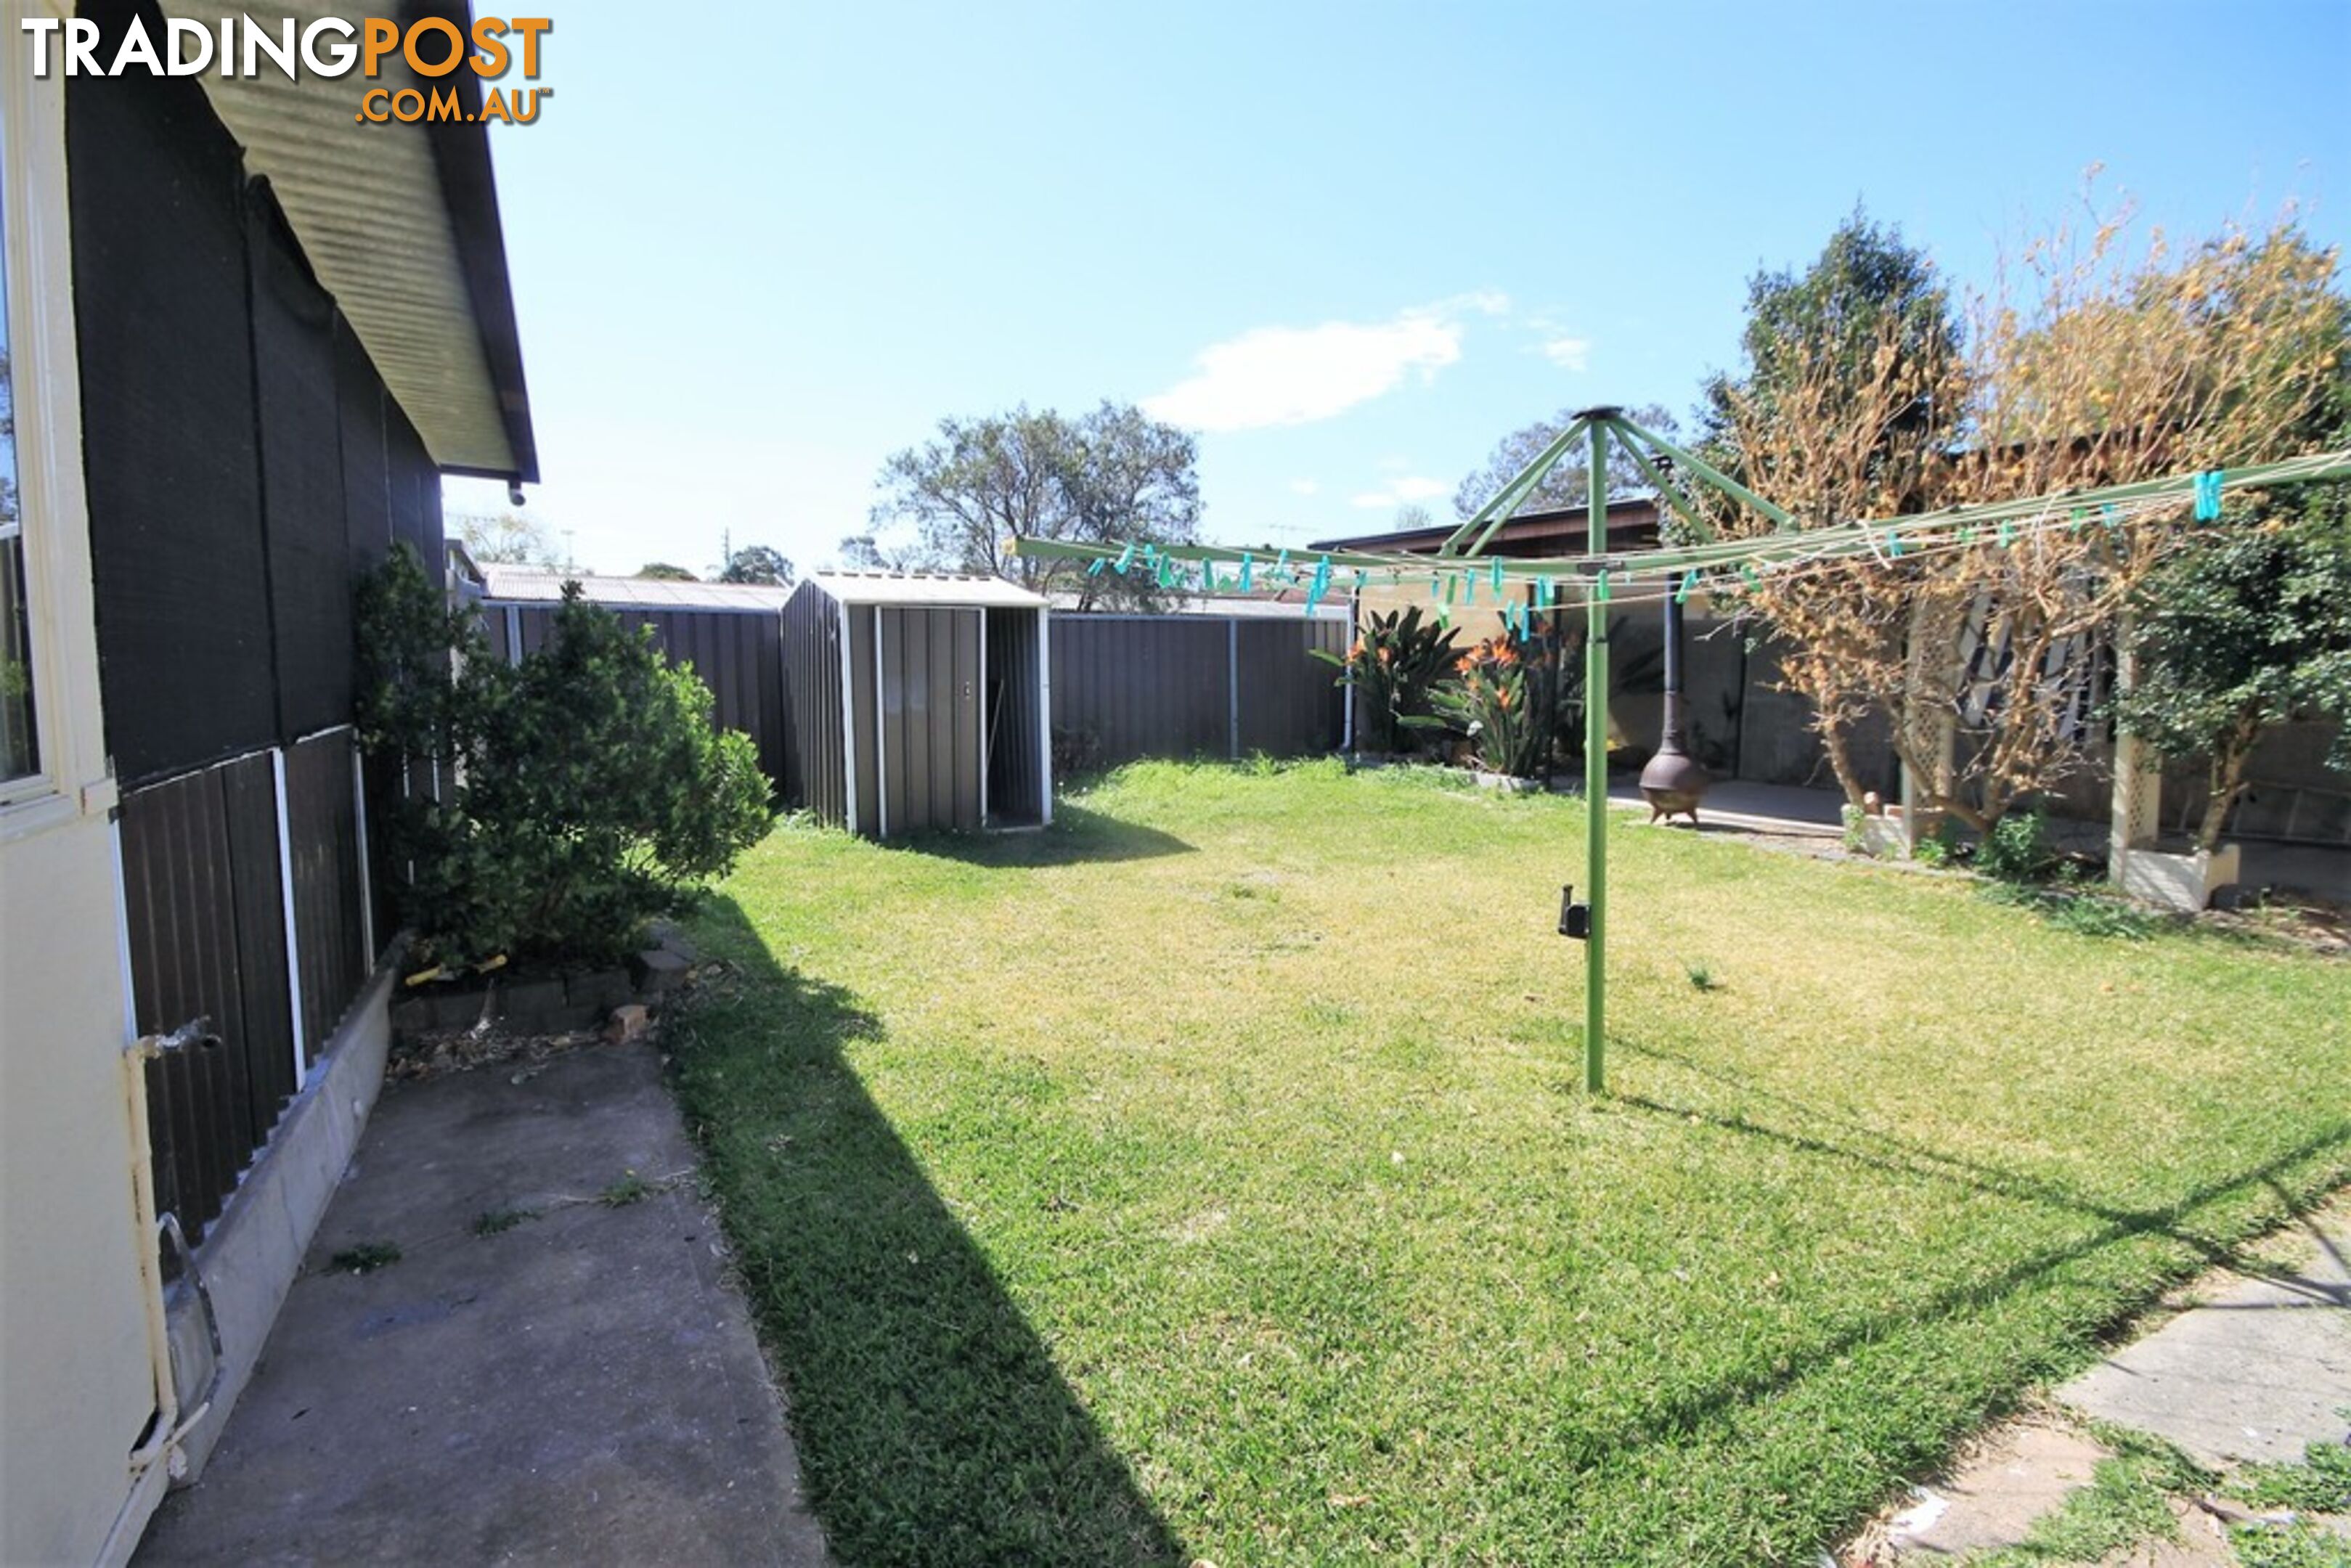 17 Finisterre Avenue WHALAN NSW 2770